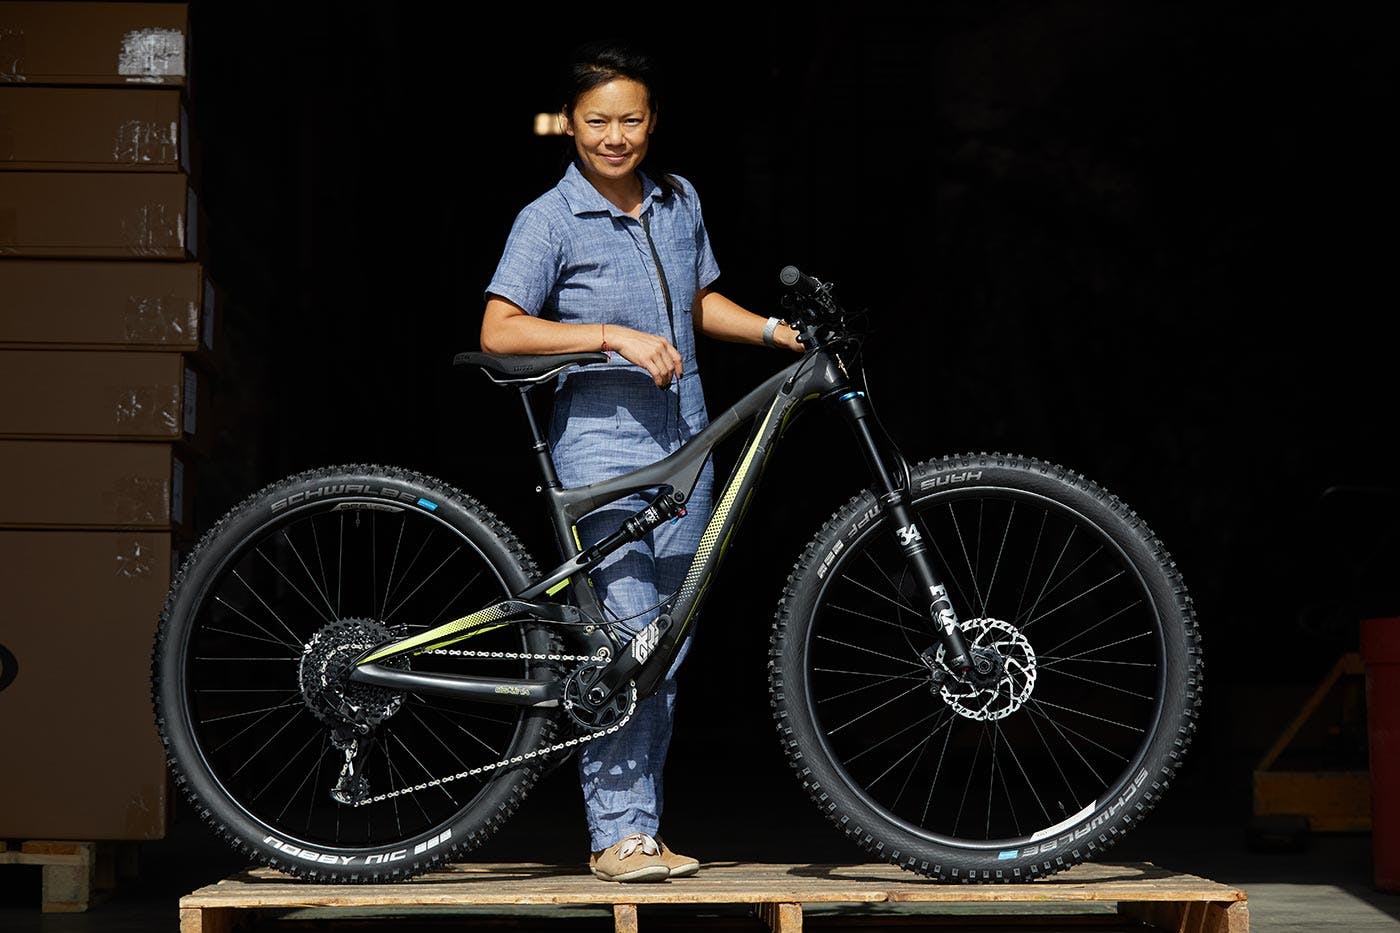 Ibis Cycles Co-owner and Lead Designer Roxy Lo standing with a mountain bike on a platform.